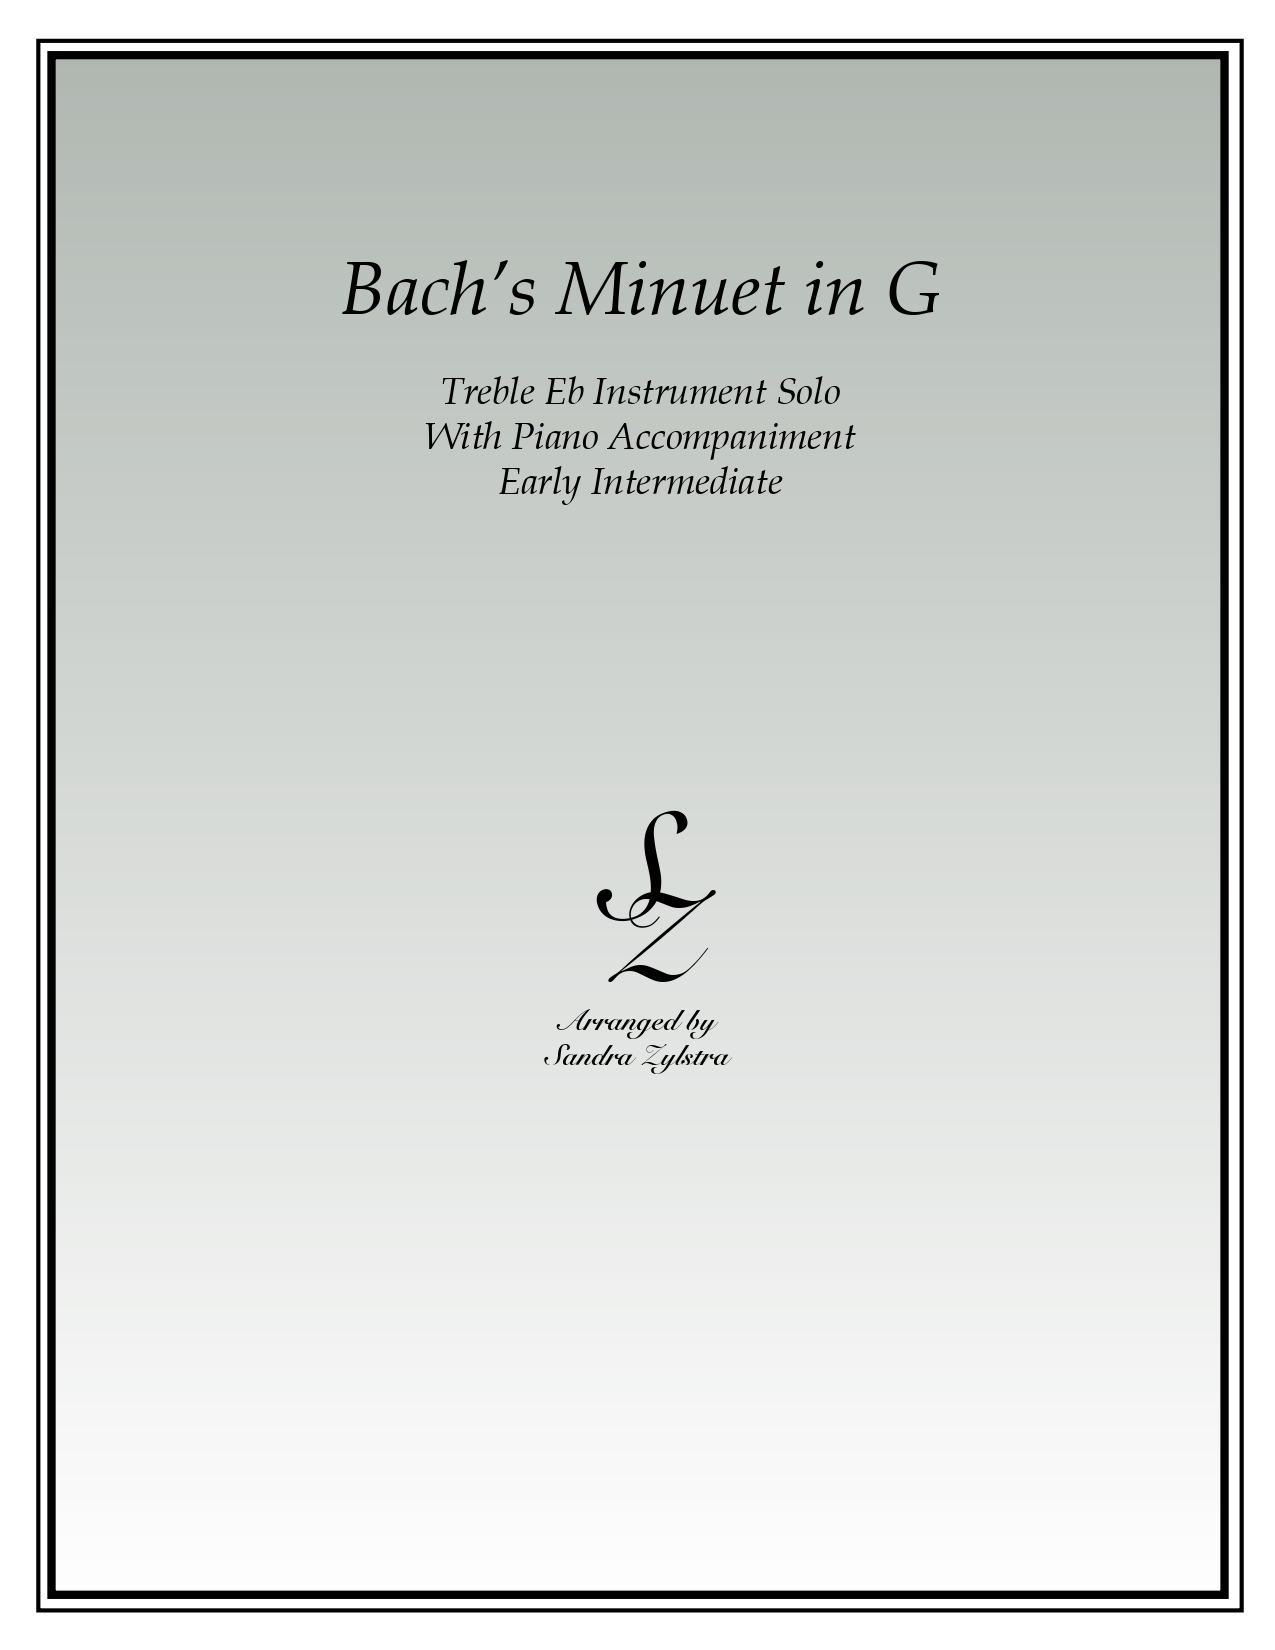 Bachs Minuet In G Eb instrument solo part cover page 00011